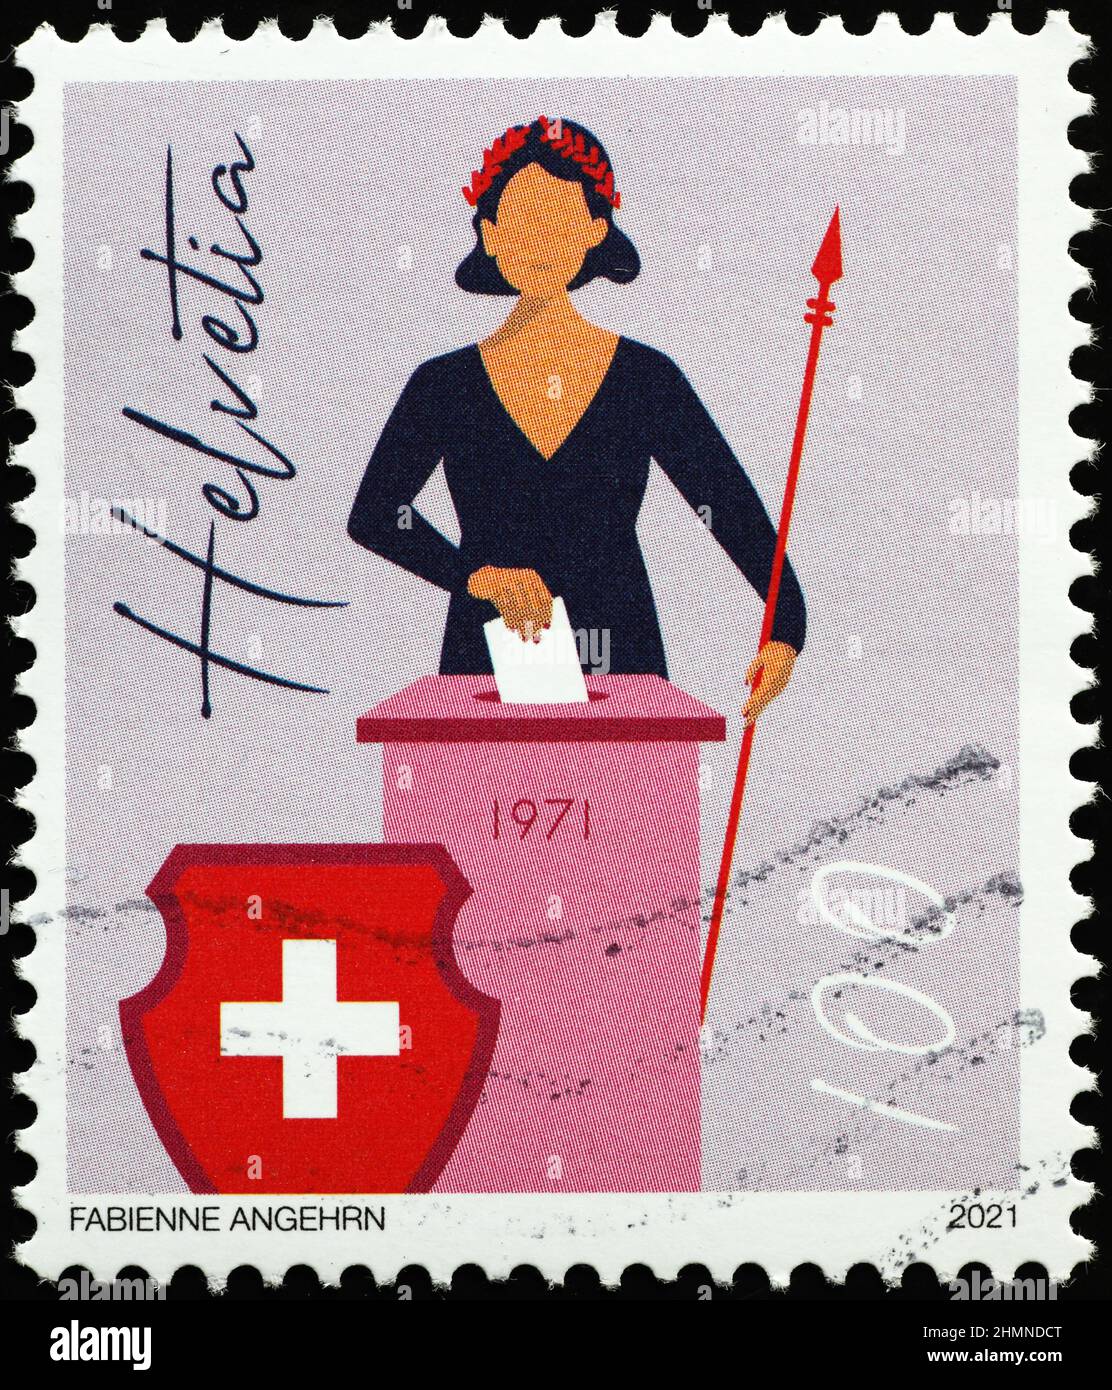 Celebration of woman suffrage on swiss postage stamp Stock Photo